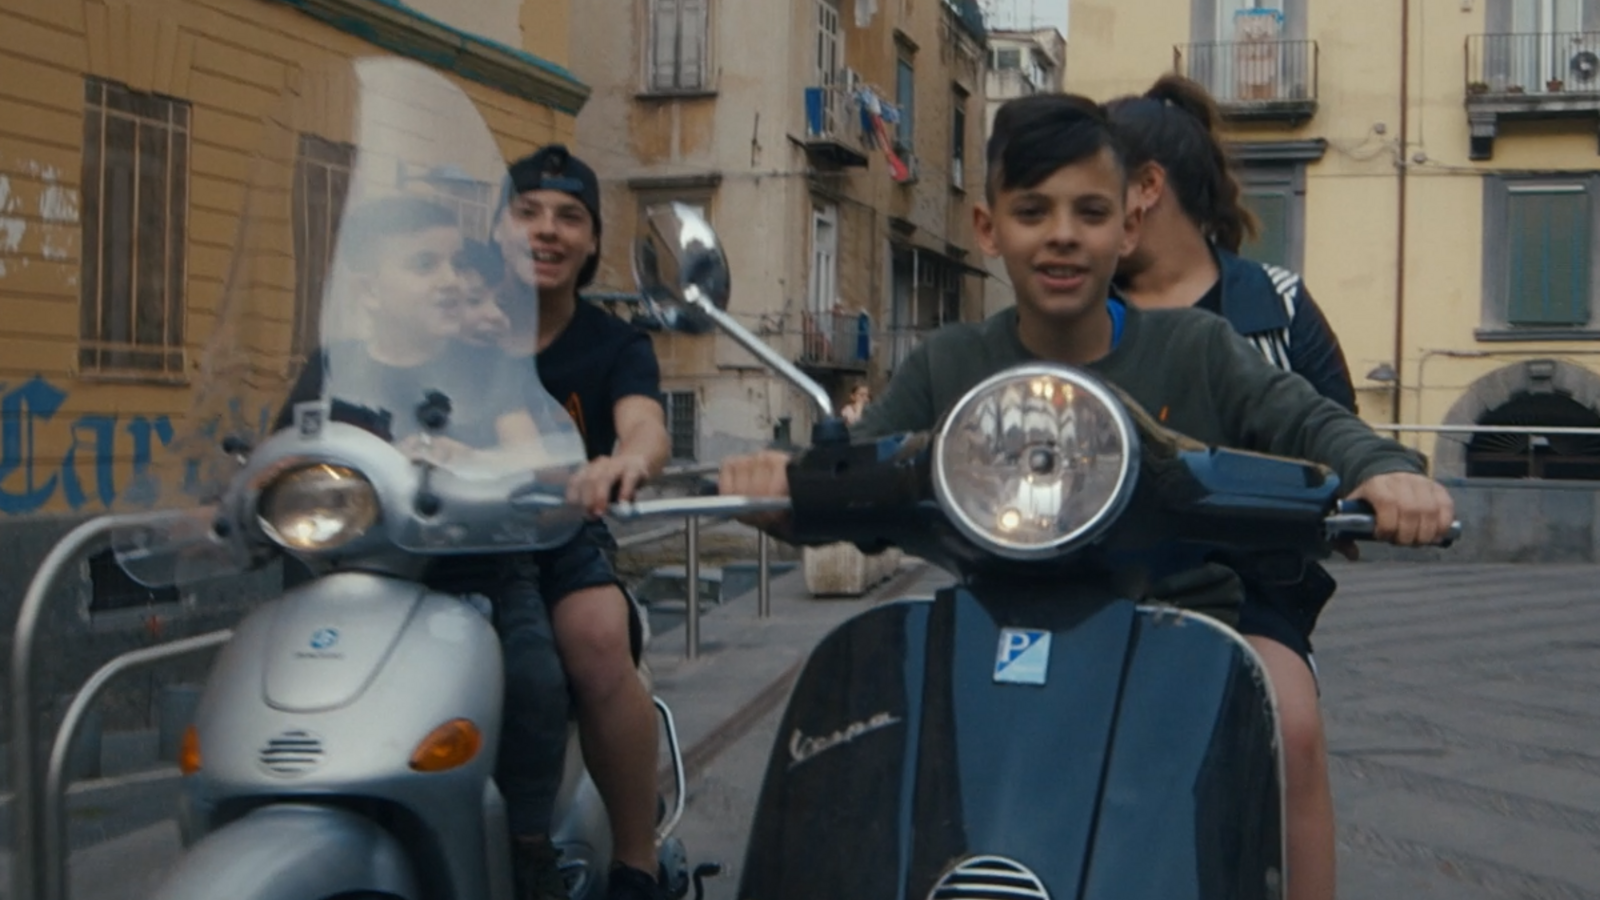 A group of young people riding vespas in the documentary NASCONDINO (HIDE & SEEK).